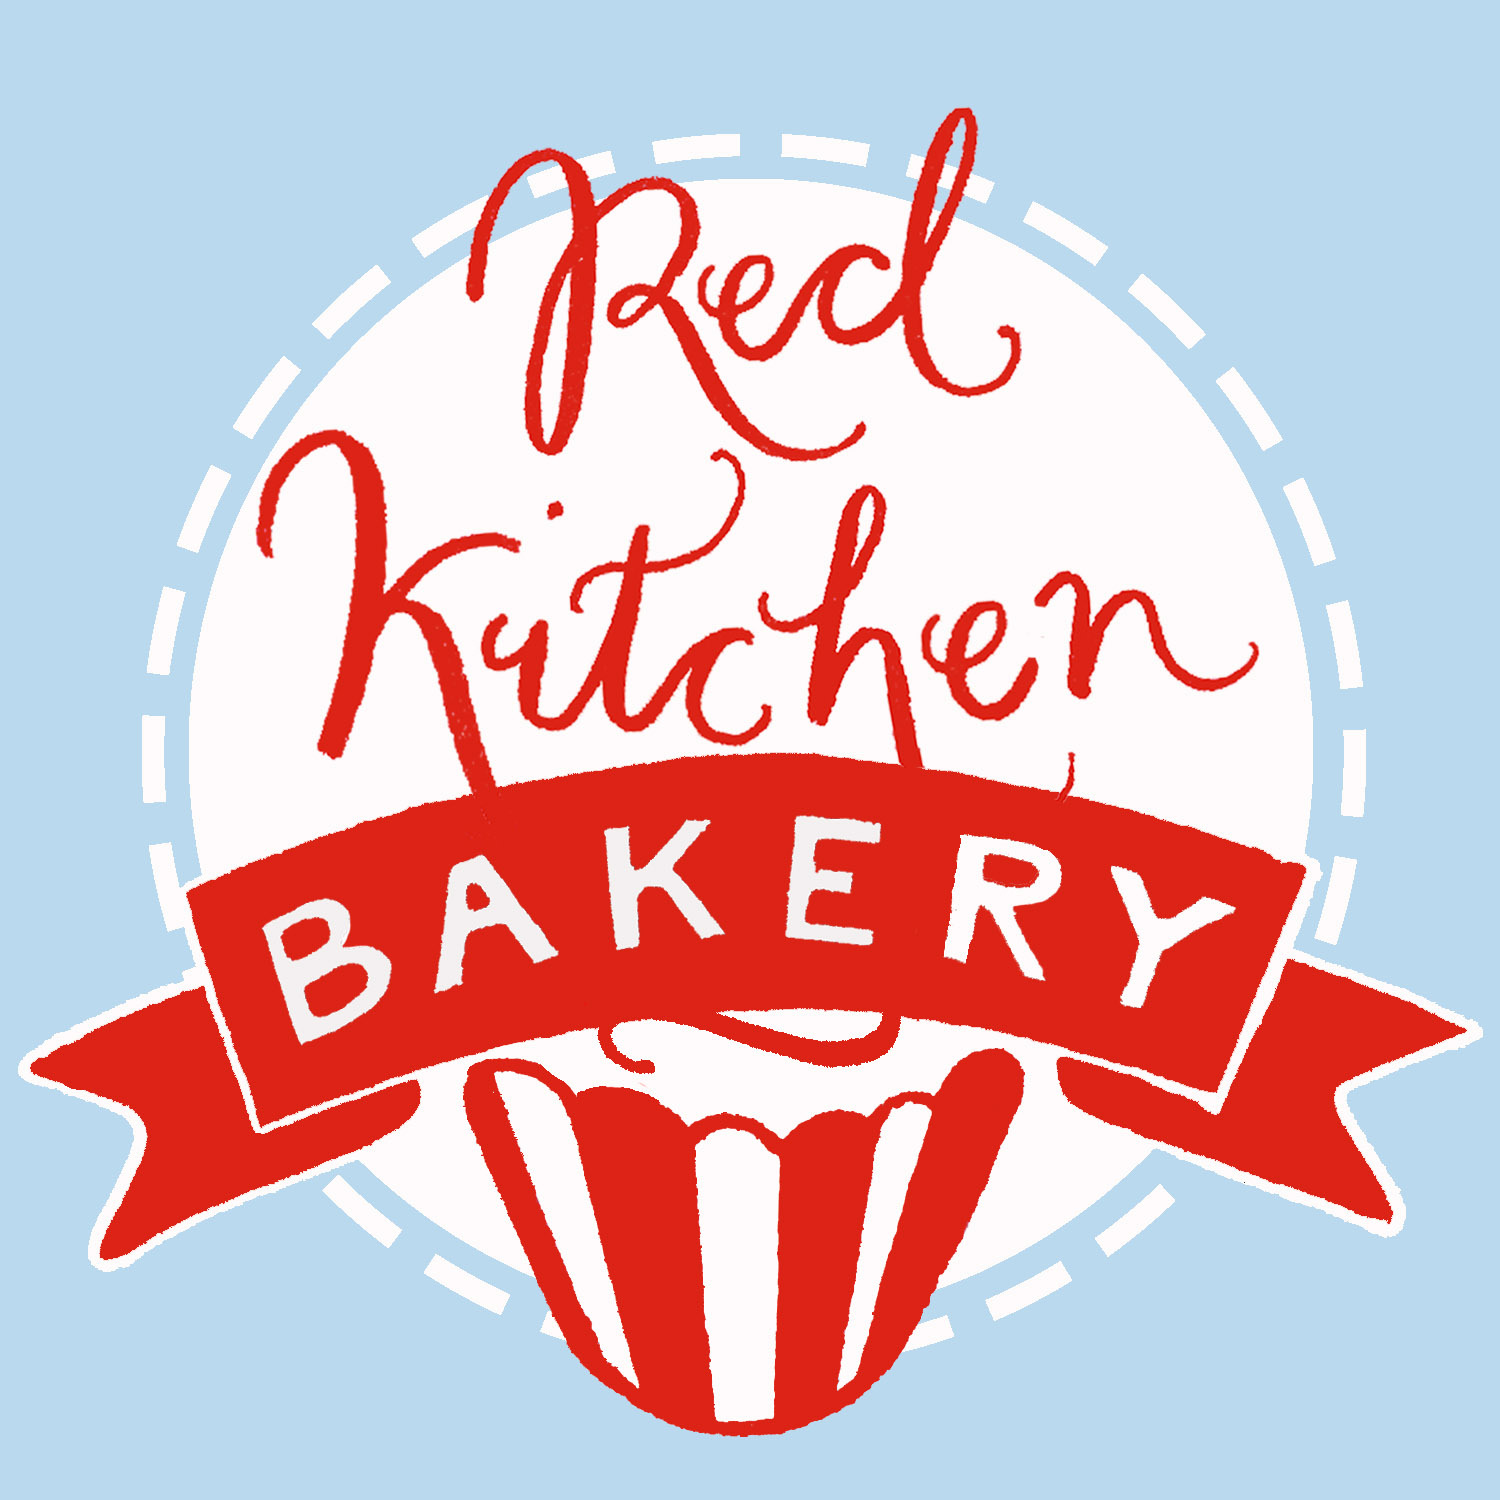 Red Kitchen Bakery